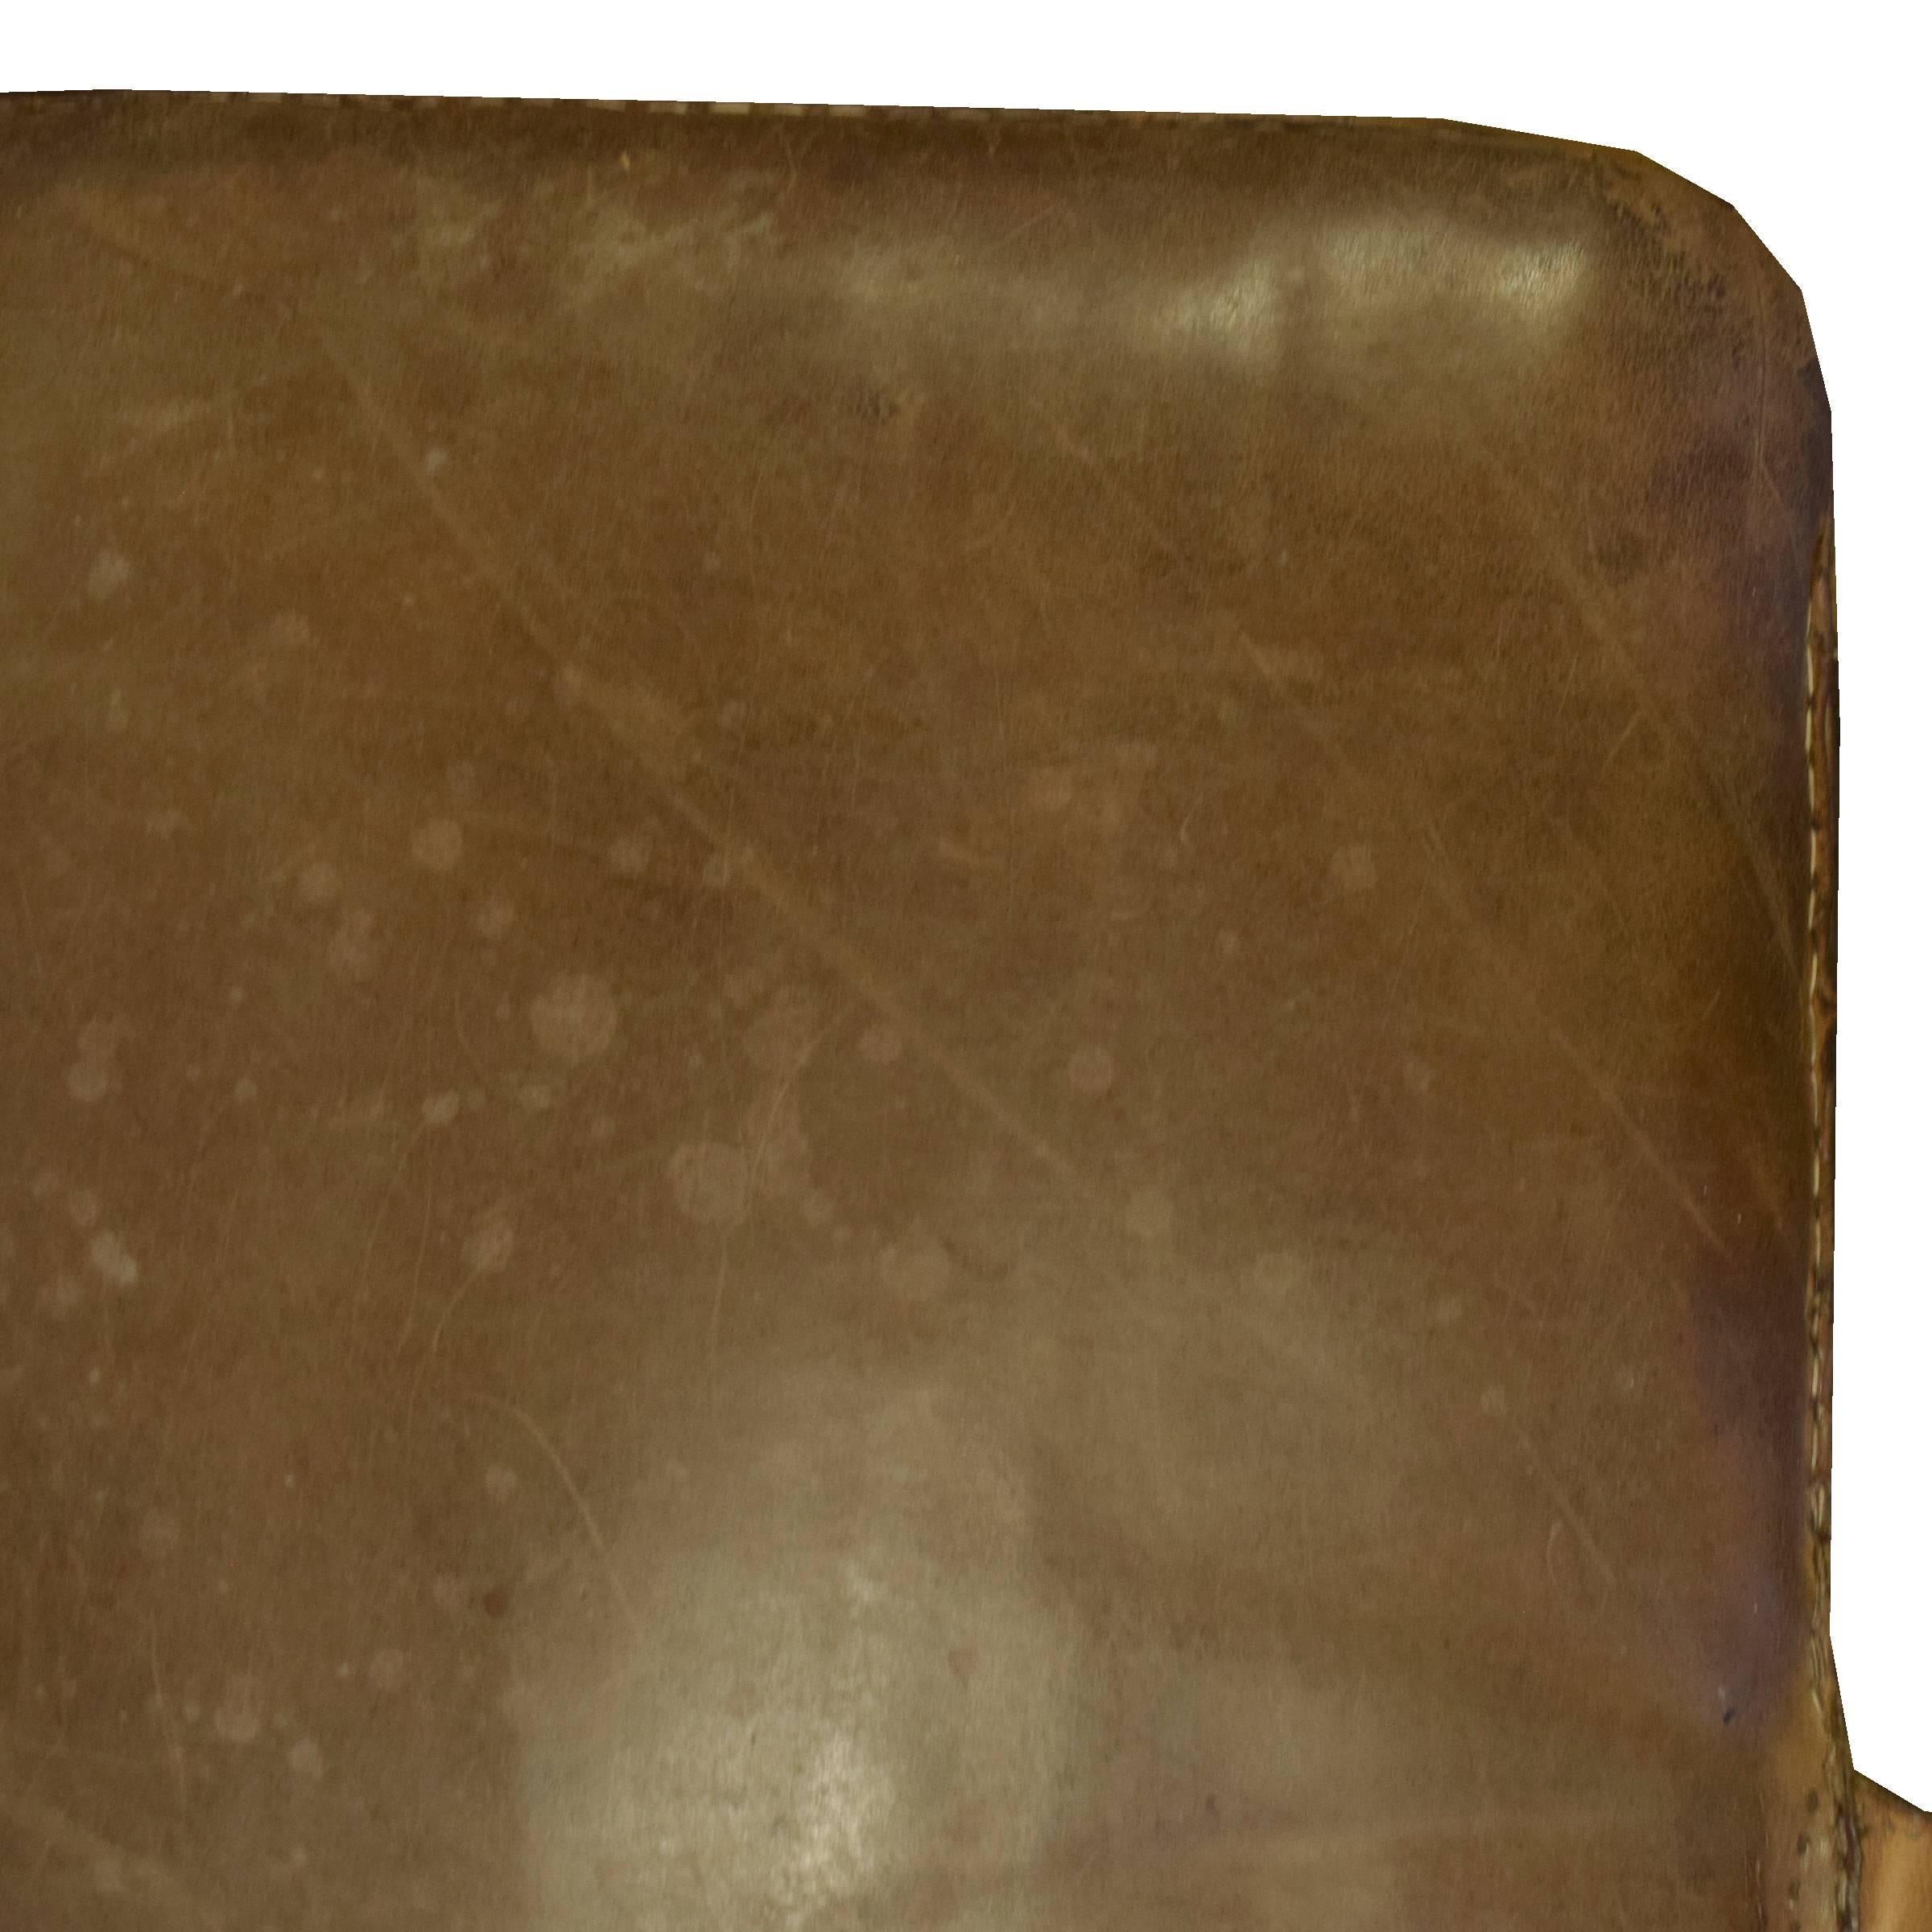 Leather mat from a Czech Republic gymnasium with a gorgeous patina, circa 1930.